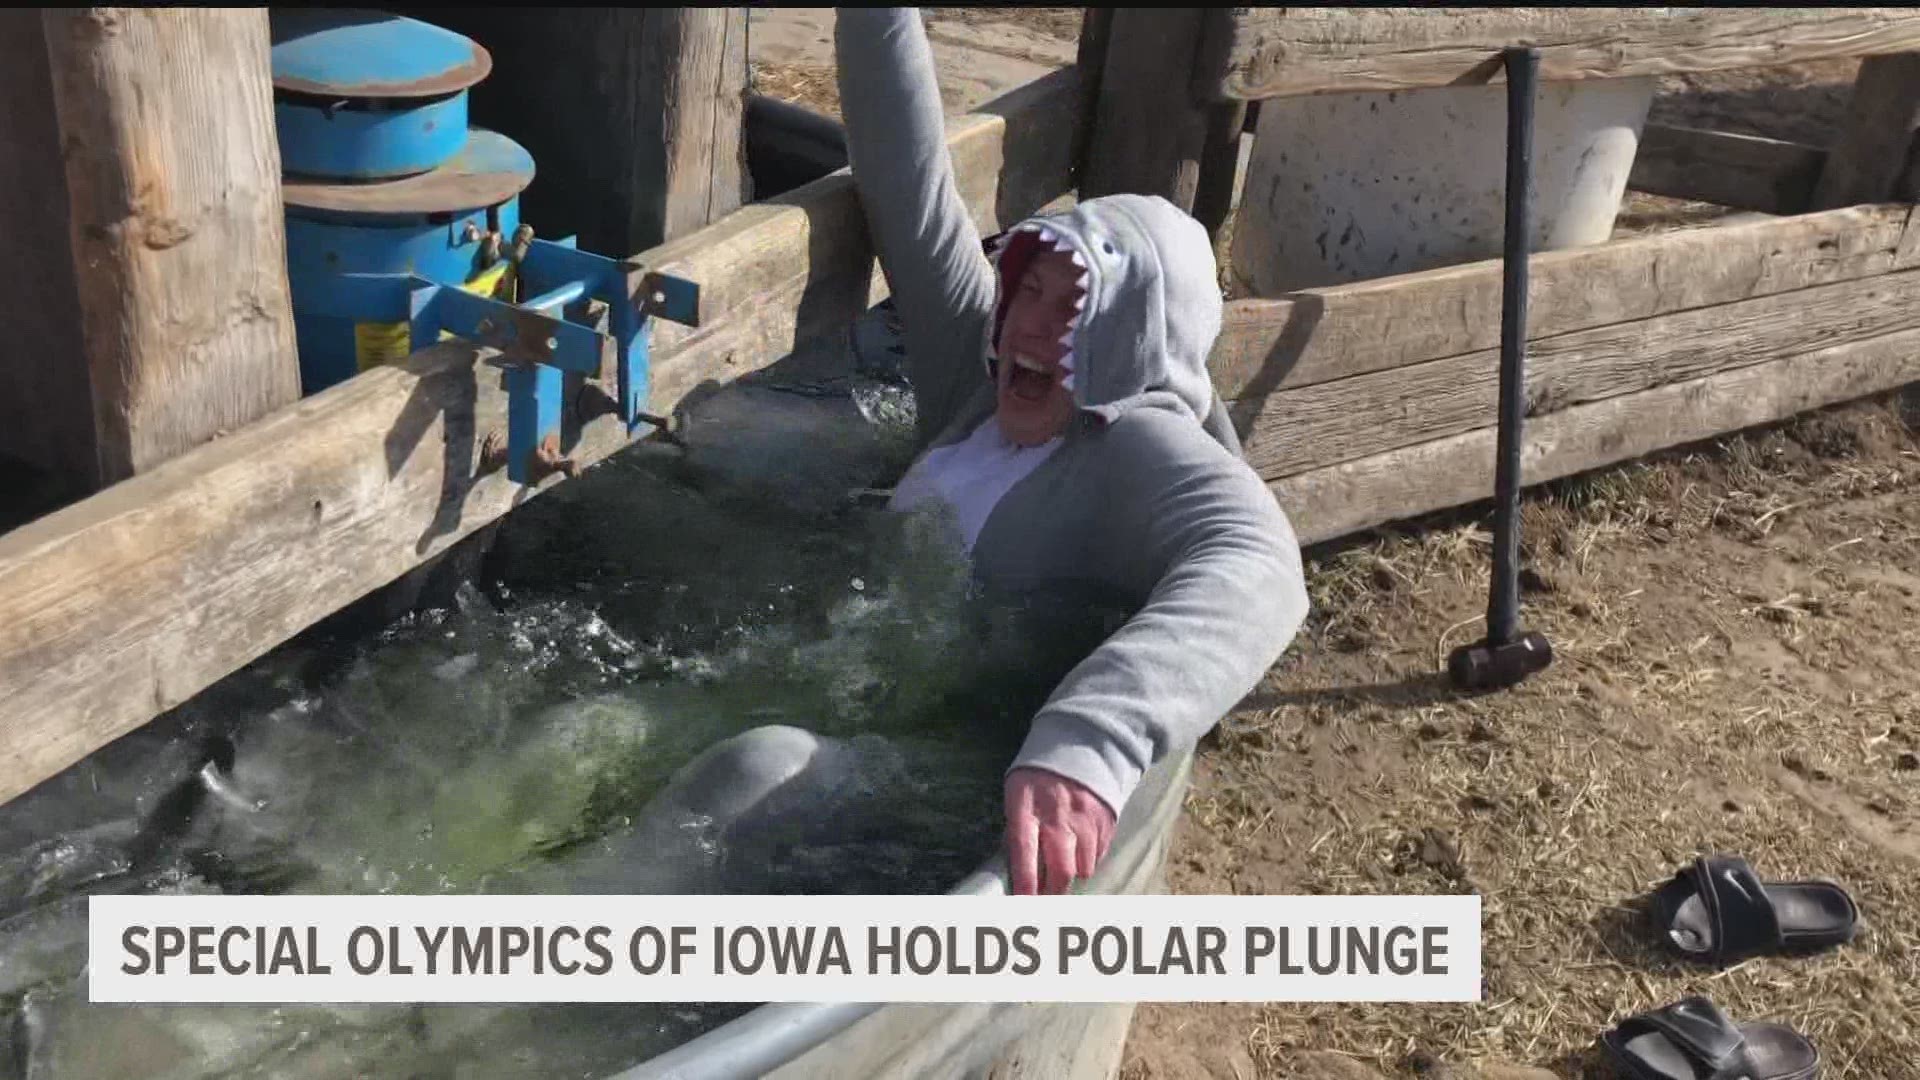 Athletes didn't get to avoid the cold water, though!